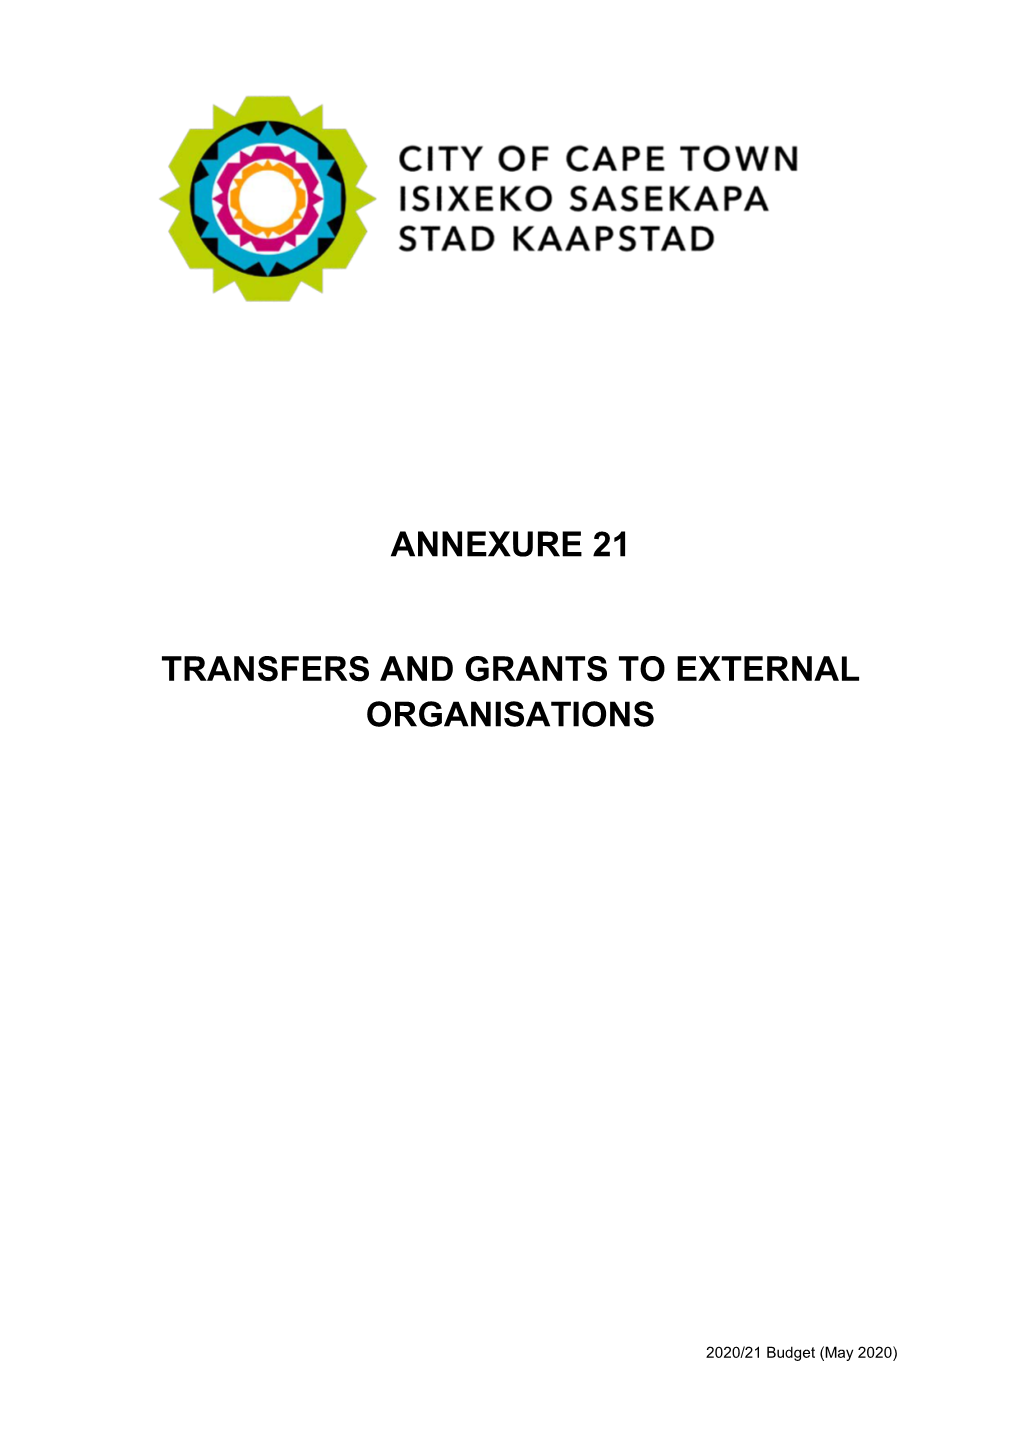 Annexure 21 Transfers and Grants to External Organisations